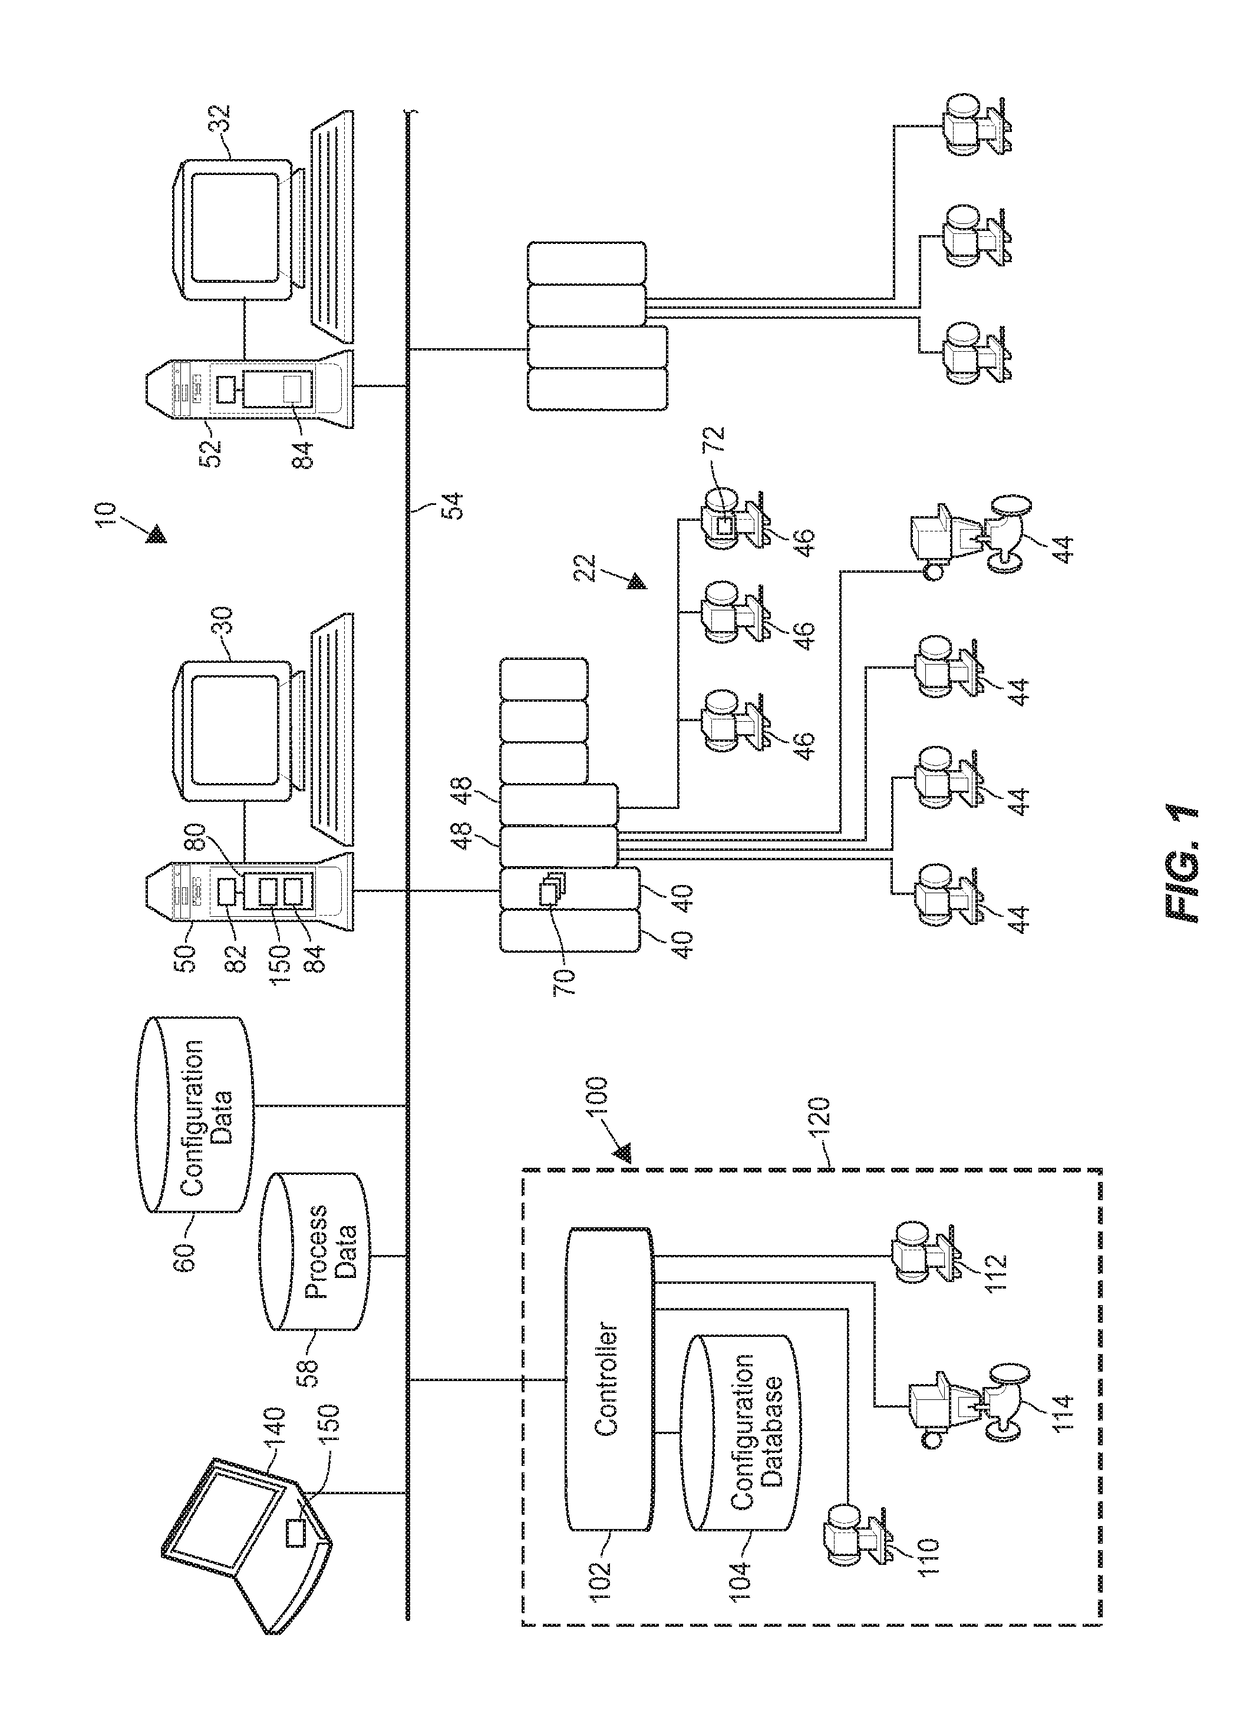 Systems and Methods for Merging Modular Control Systems into a Process Plant